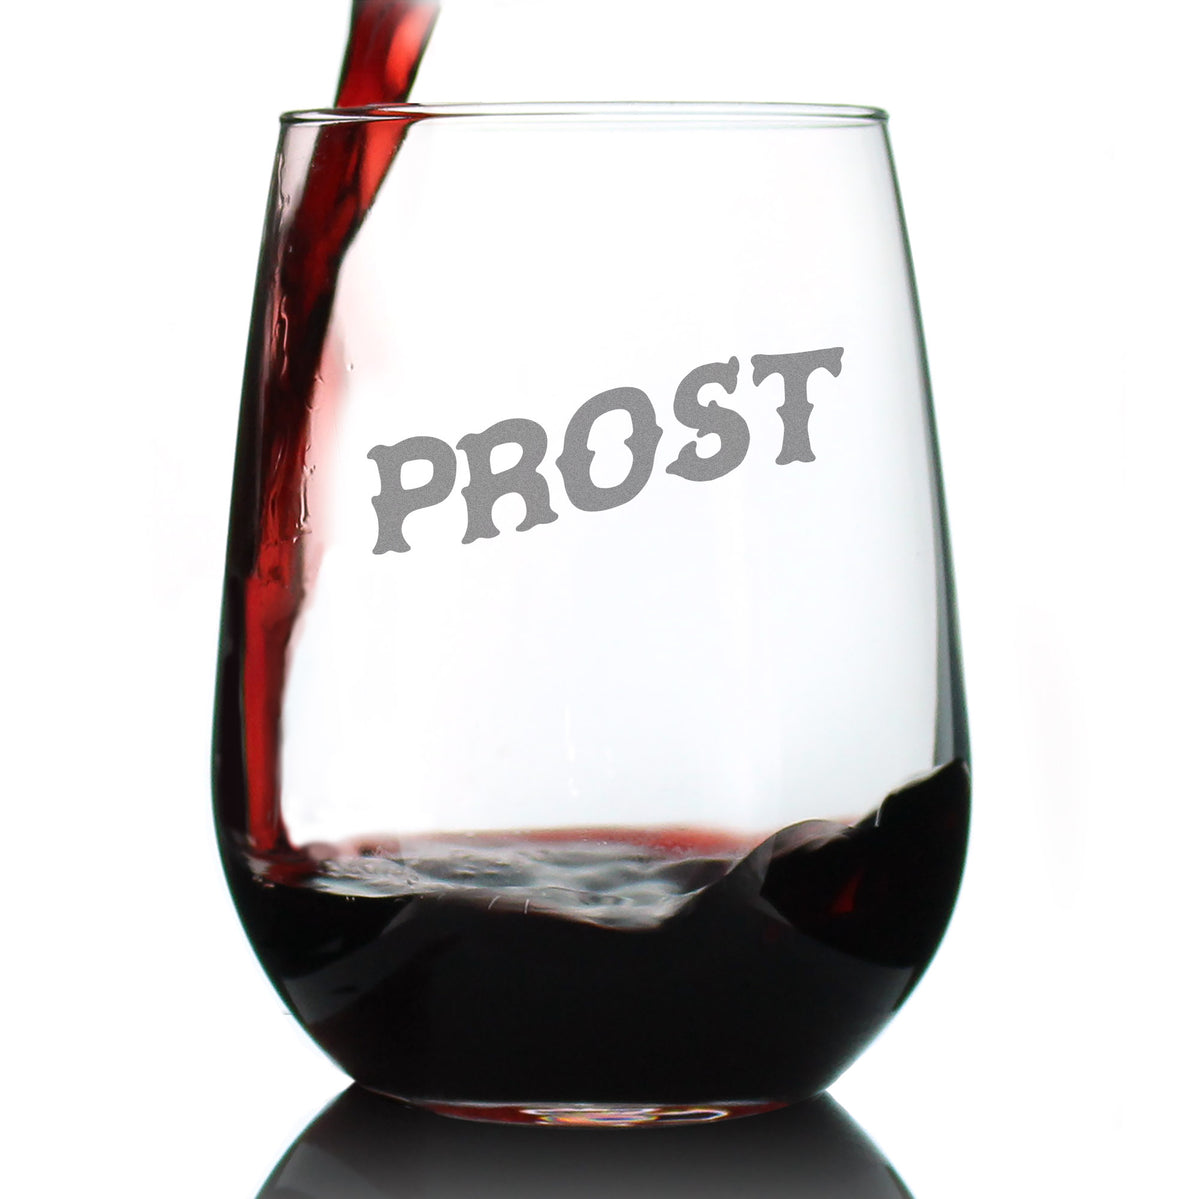 Prost - German Cheers - Stemless Wine Glass - Cute Germany Themed Gifts or Party Decor for Women and Men - Large